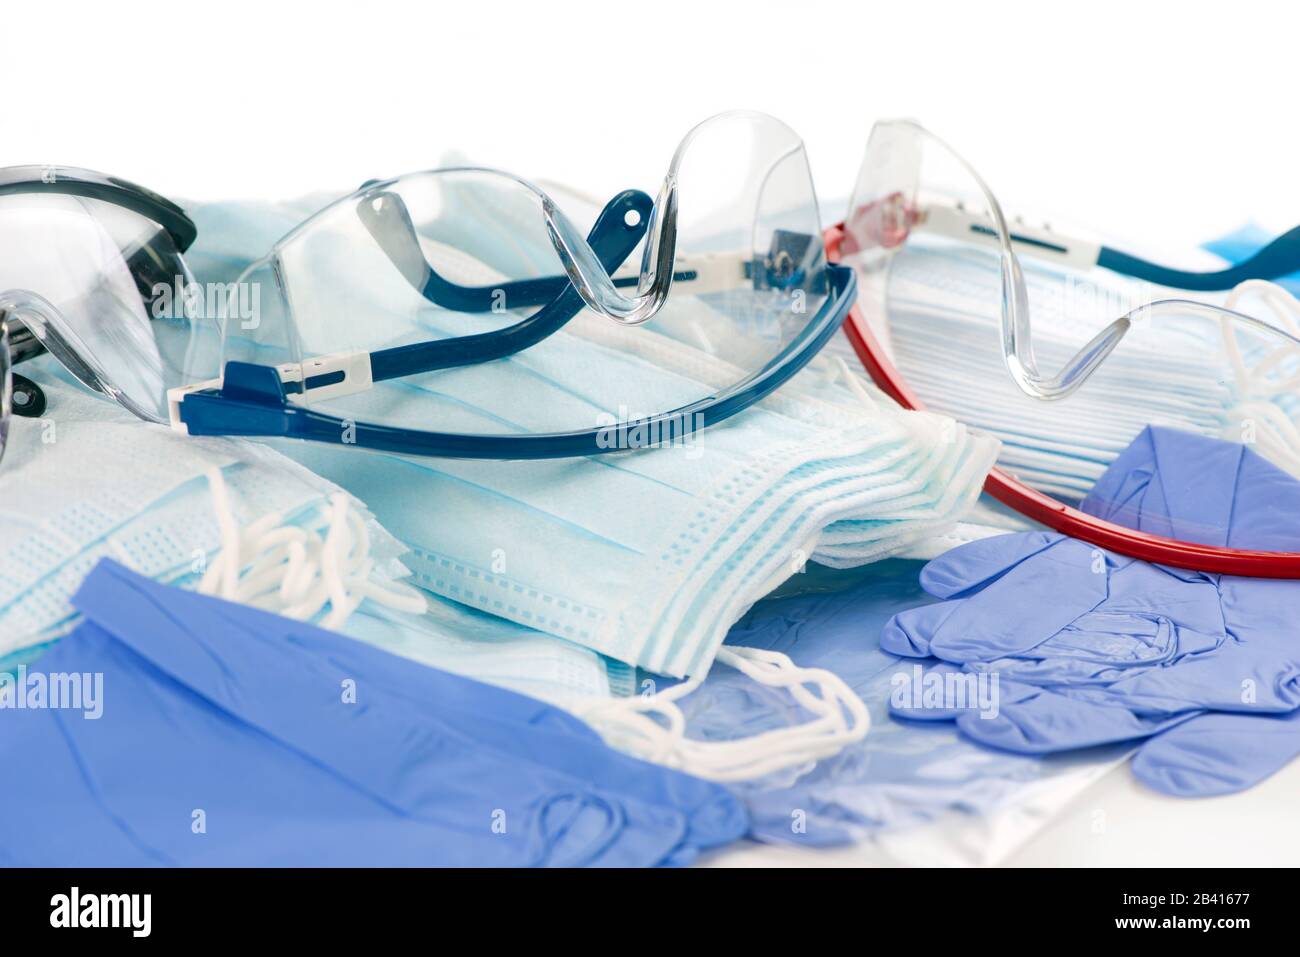 Personal protection equipment, safety glasses, many masks and nitrile gloves to prevent the spread of infection. Stock Photo